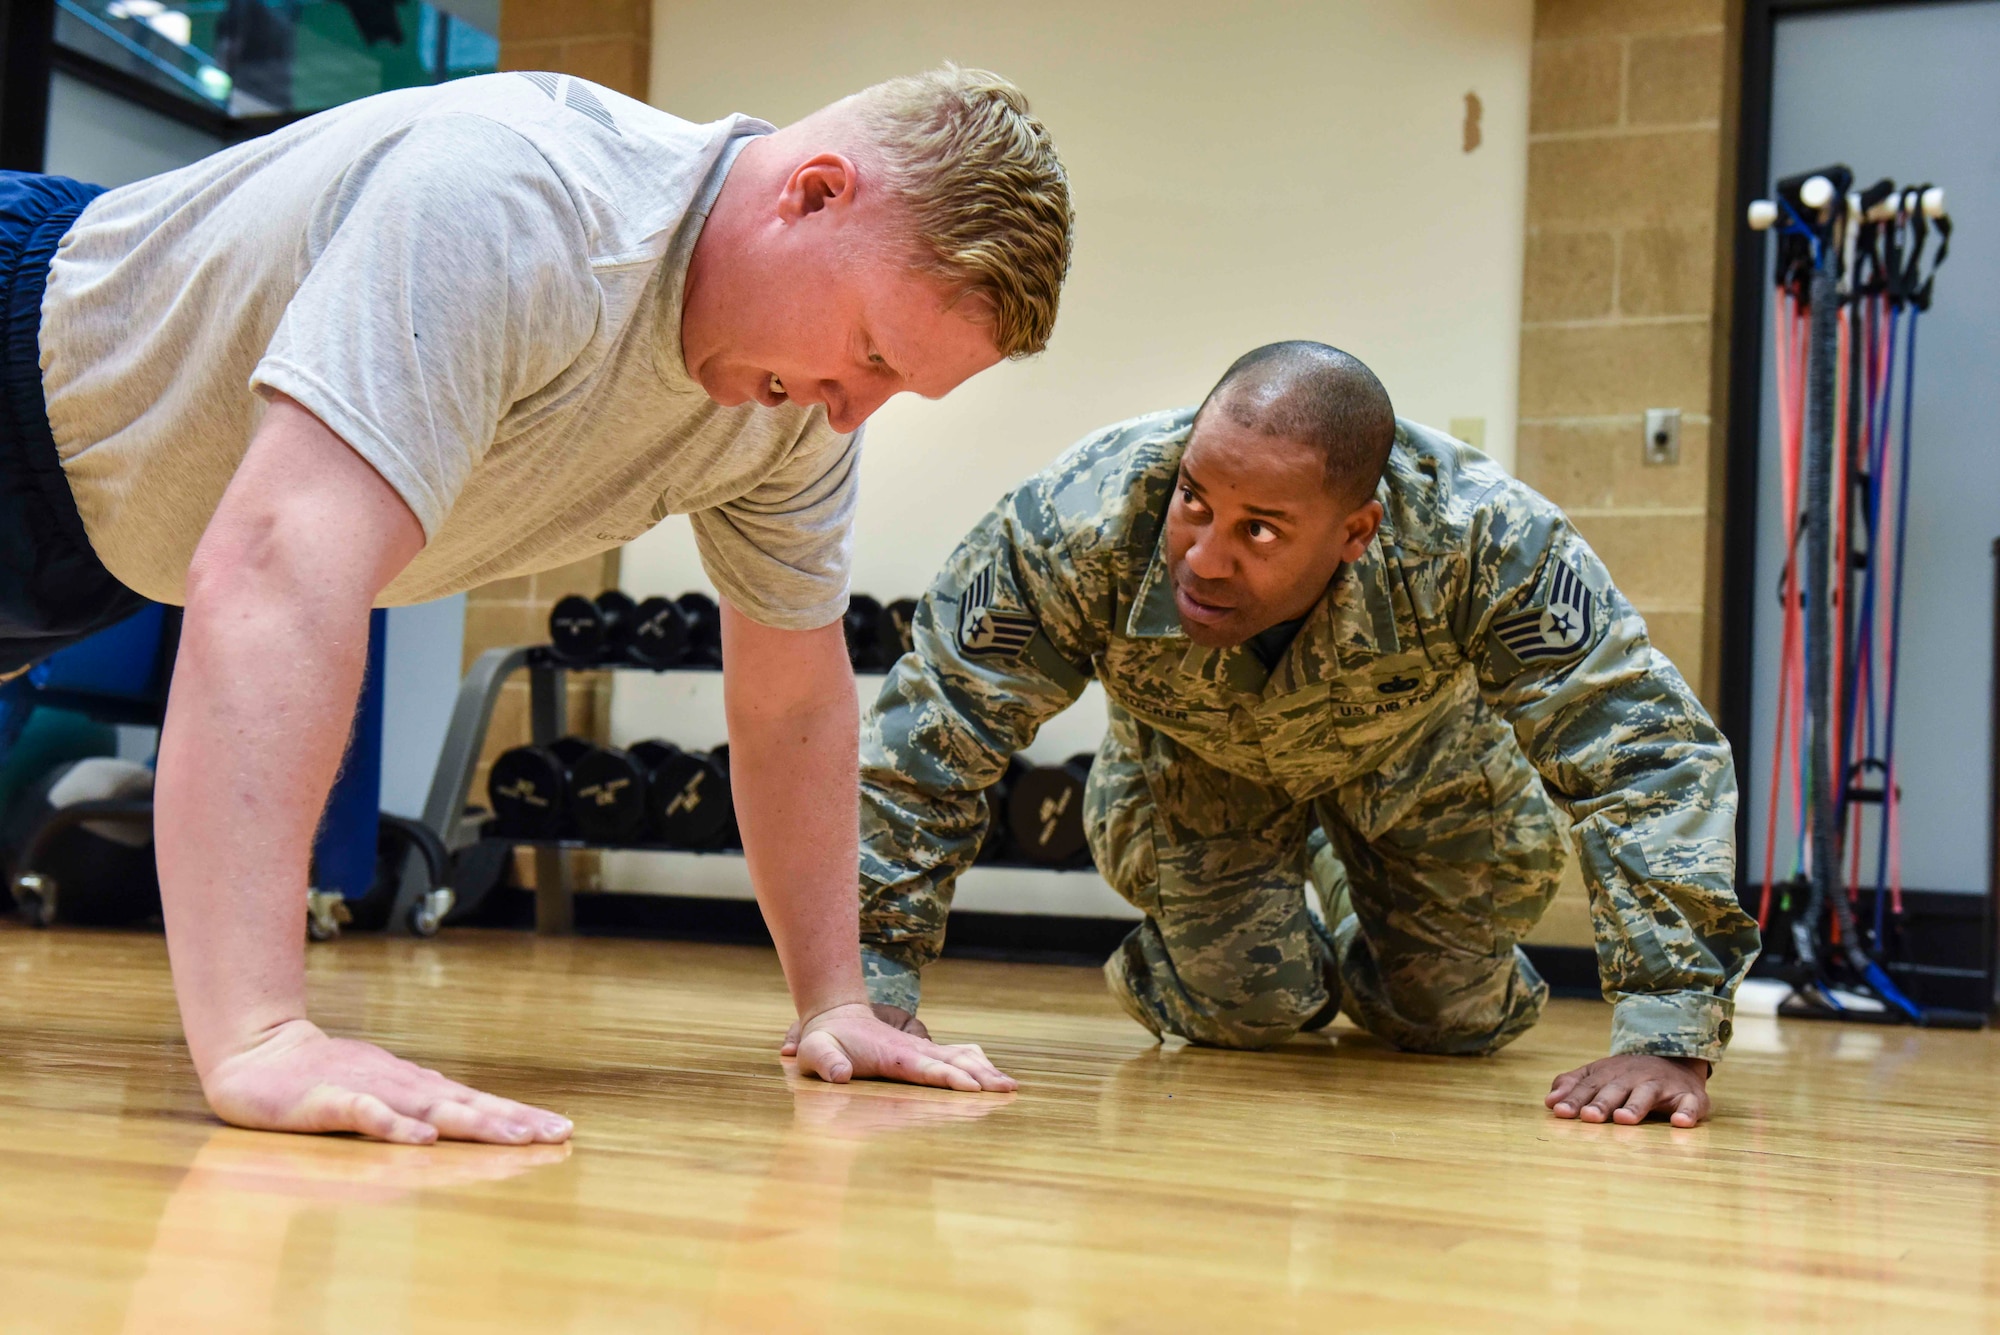 Staff Sgt. Derek Rucker, an air transport apprentice in the 67th Aerial Port Squadron, motivates an Airman to perform a few more repetitions during the pushup portion of the Air Force physical fitness test March 2, 2019, at the Warrior Fitness Center on Hill Air Force Base, Utah